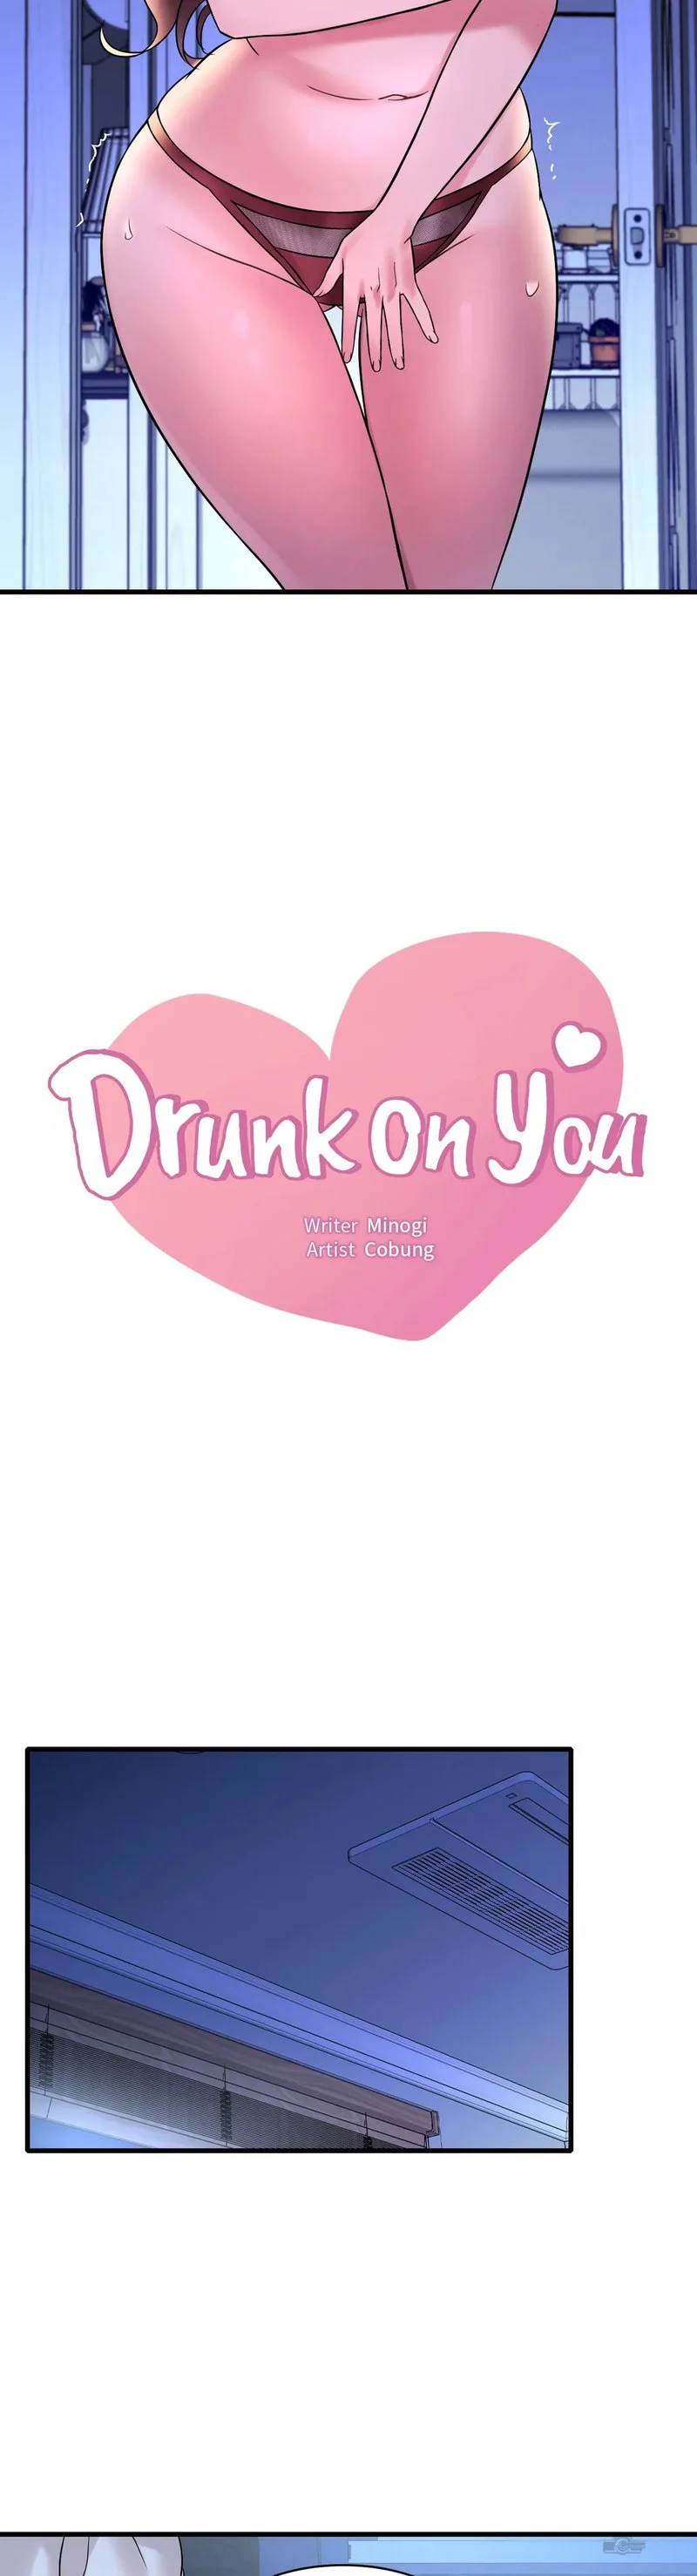 drunk-on-you-chap-25-1